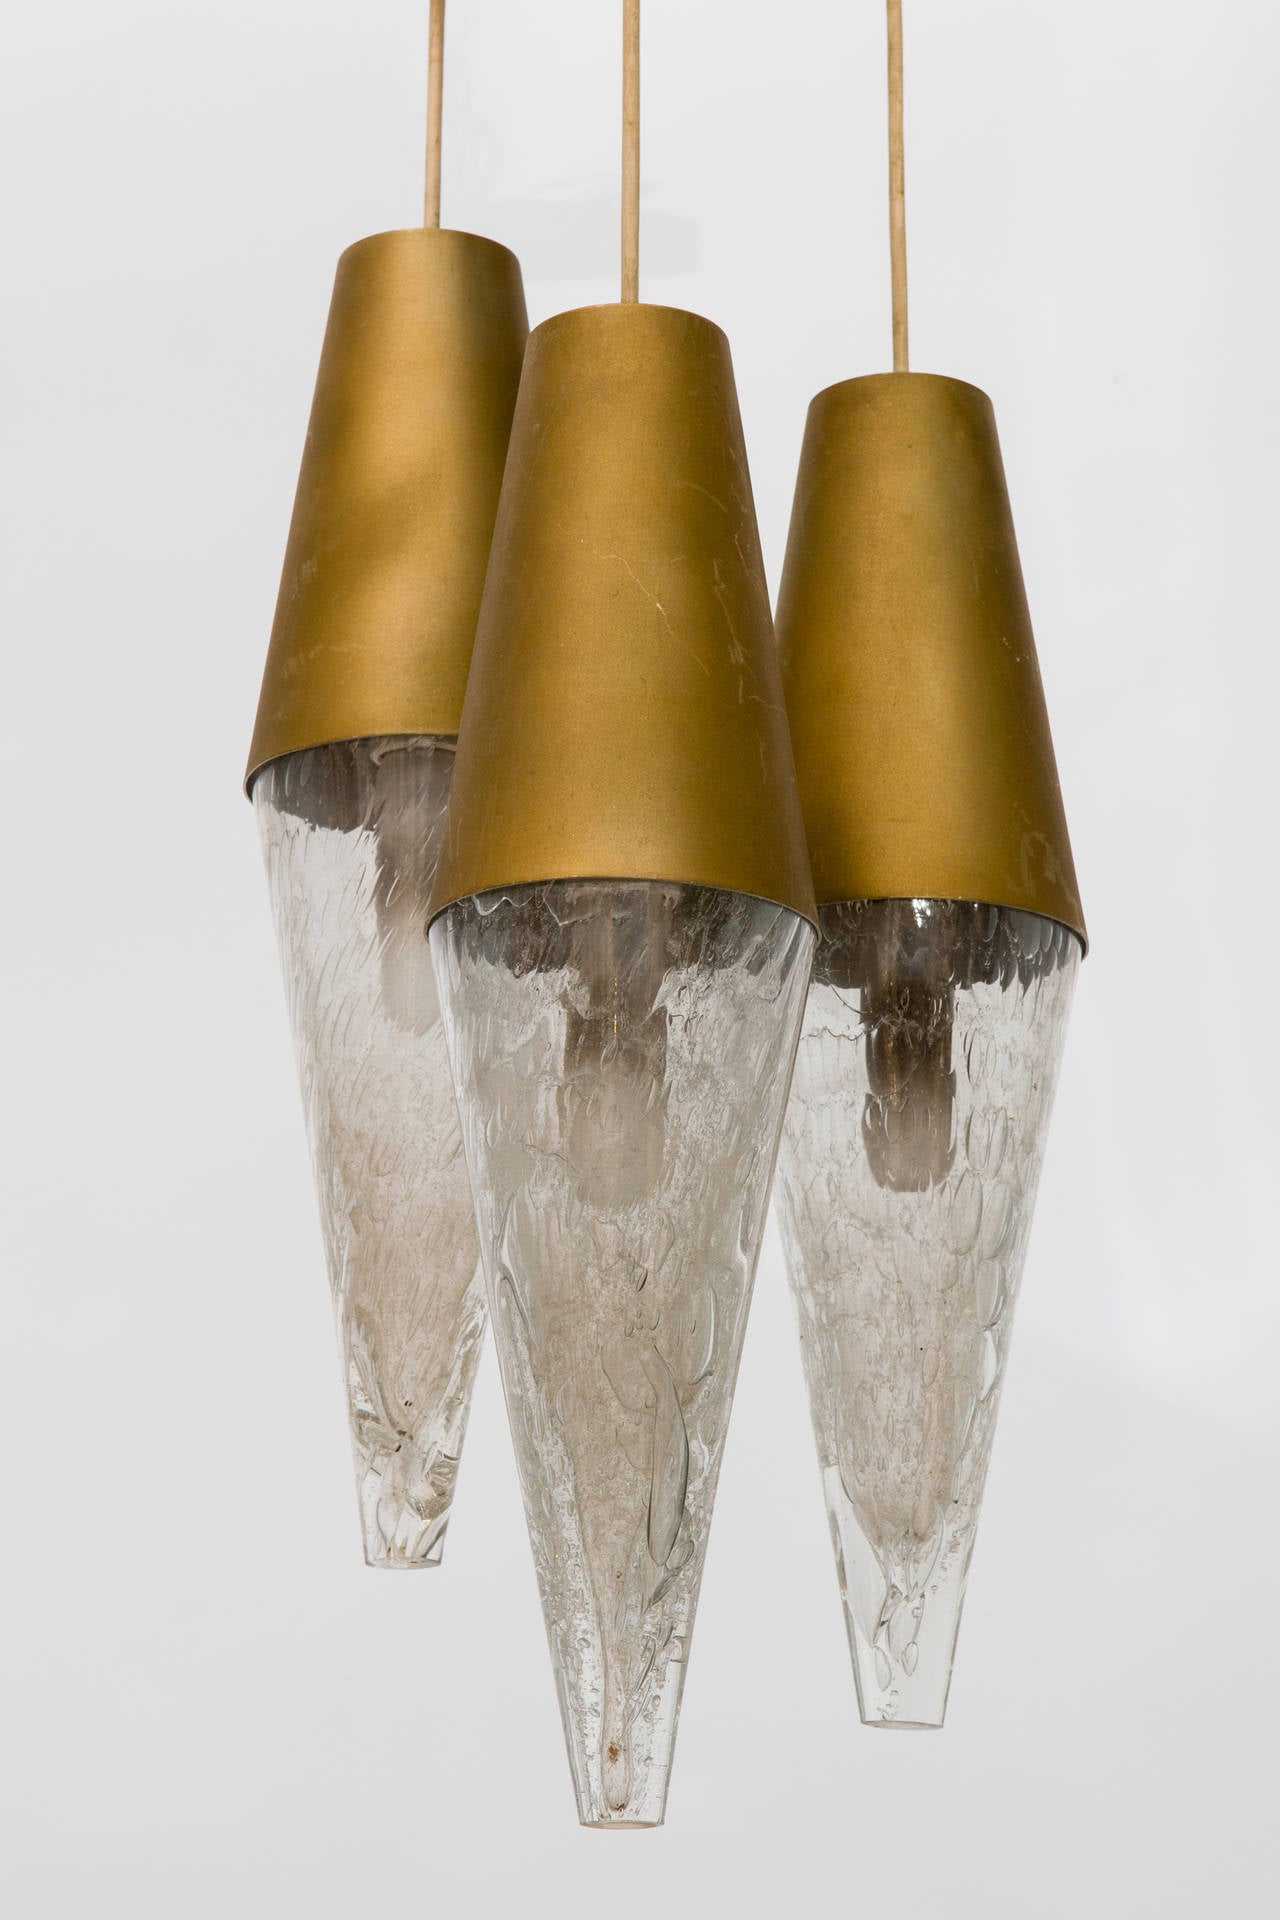 Three pendant staggered glass and metal cone, 1950s fixture.
The shades need to be painted. Scratches and one small indentation on shades. See last 2 photos.
 